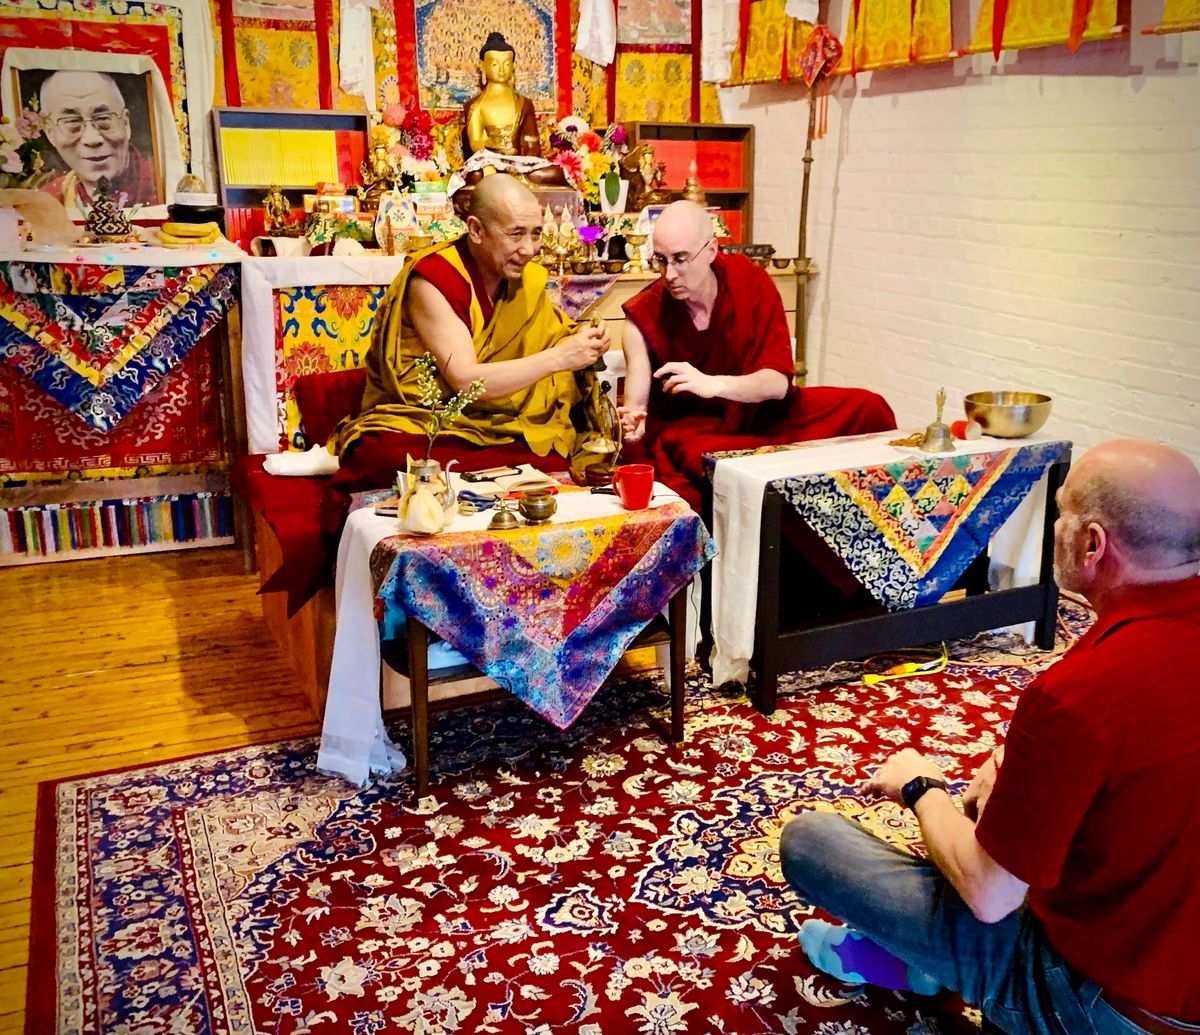 How to Meditate, Chattanooga - Conference with Lama Lobsang Samten, Buddhist Monk